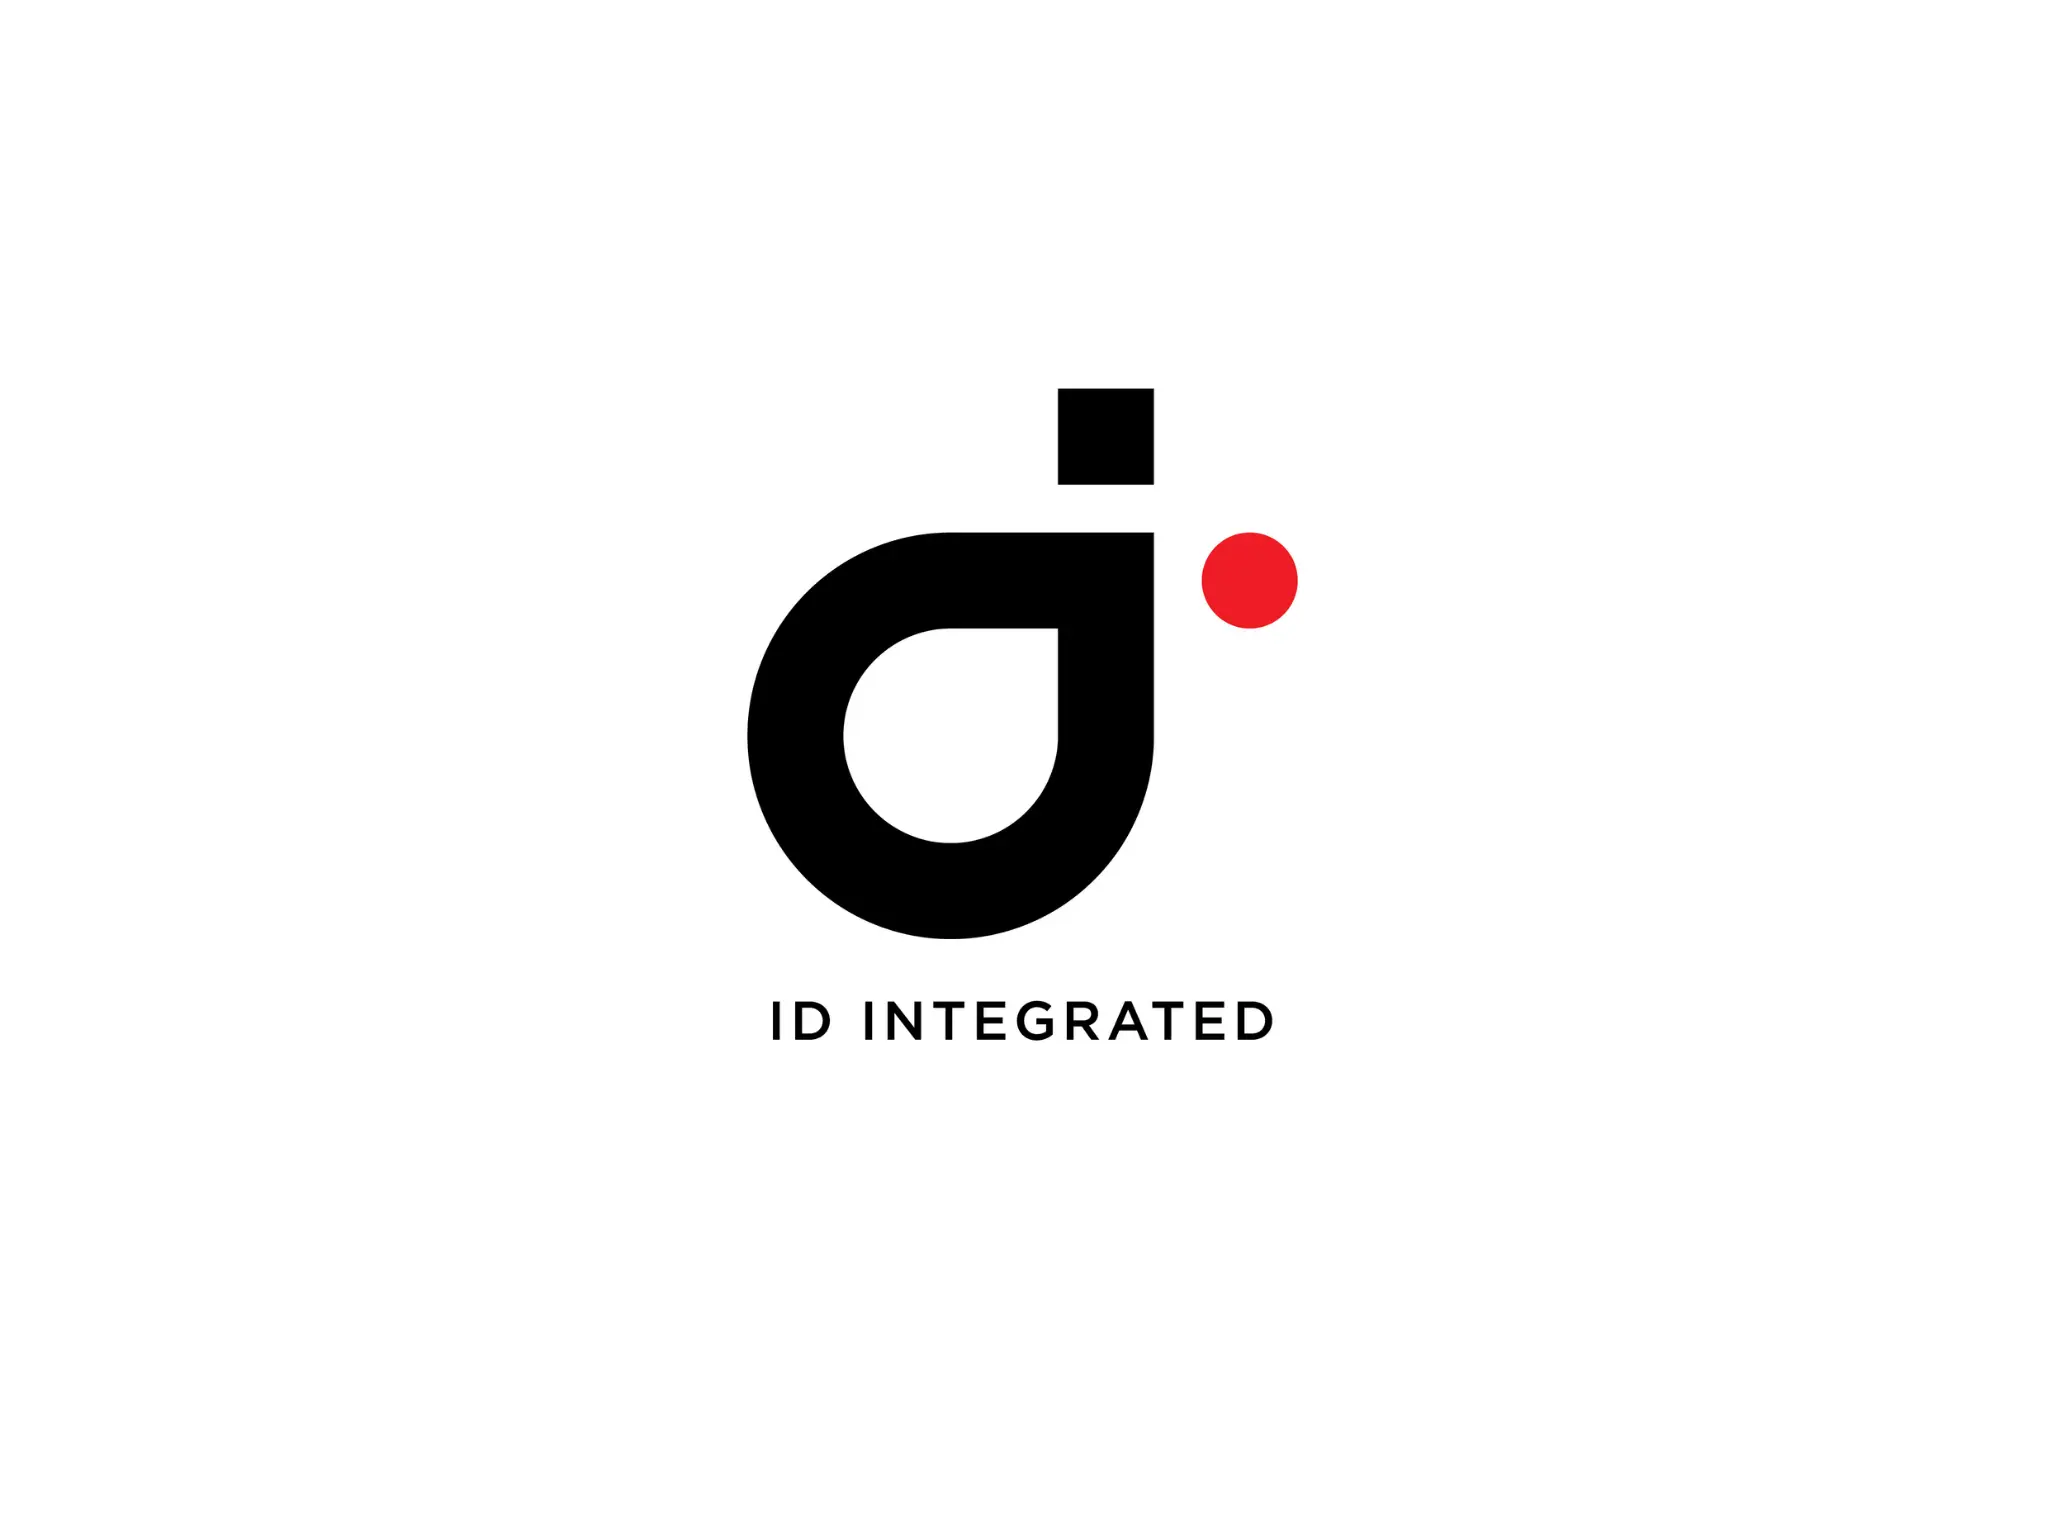 ID INTEGRATED